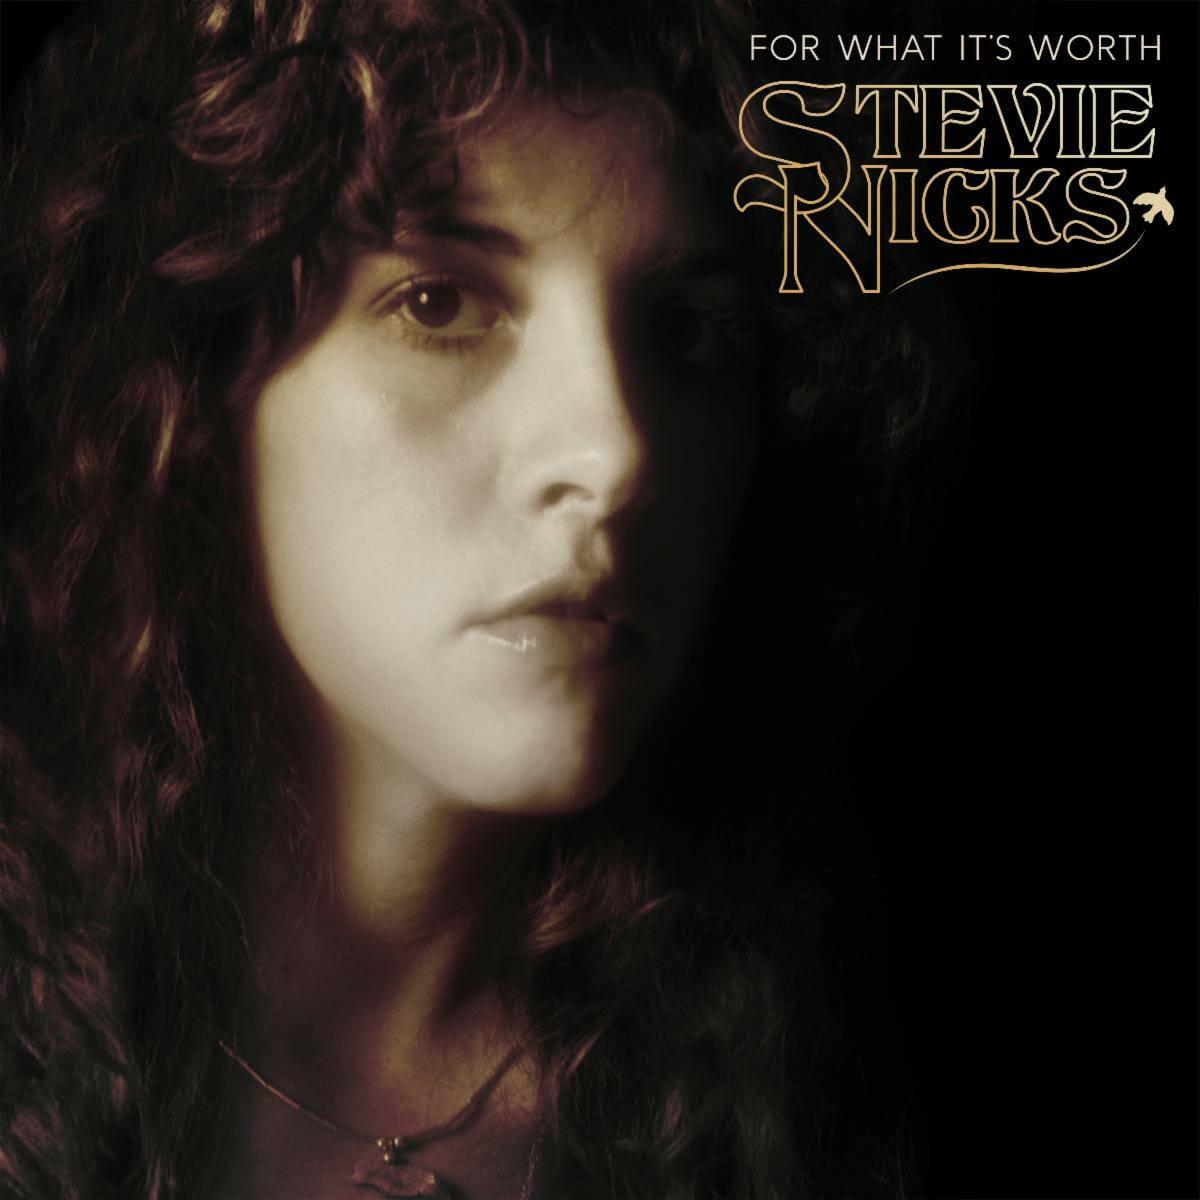 Stevie Nicks Releases Cover of Buffalo Springfield’s “For What It’s Worth”